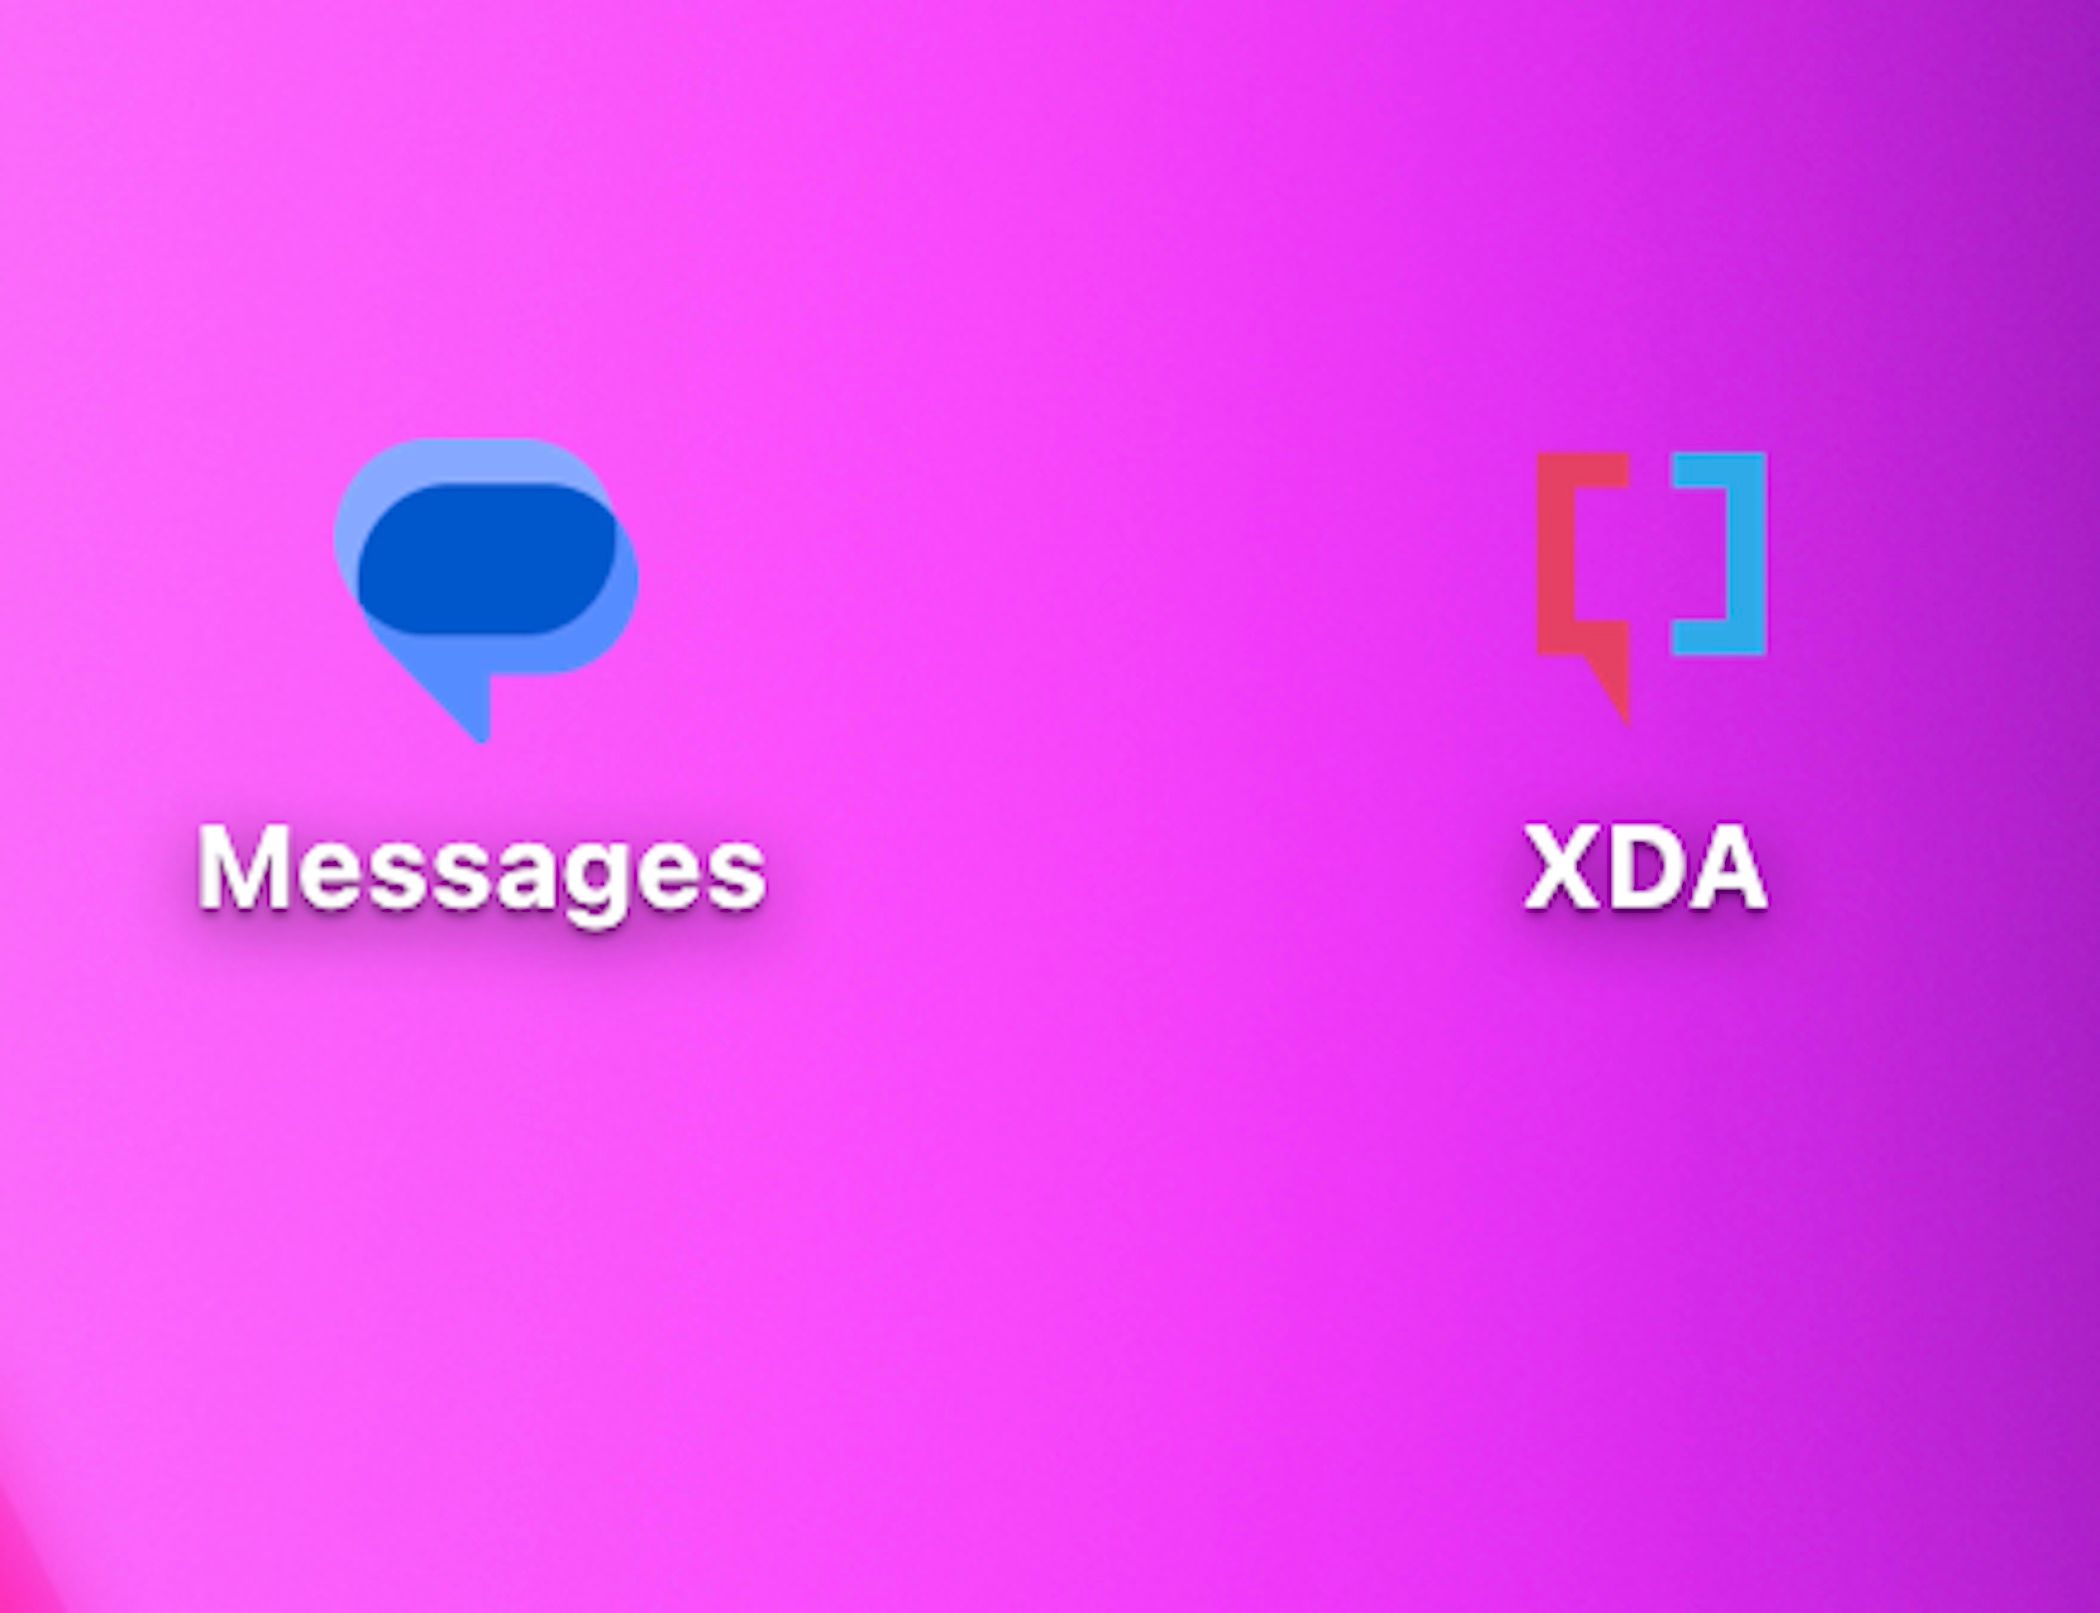 An image showing the XDA and Google Messages app icons next to each other.